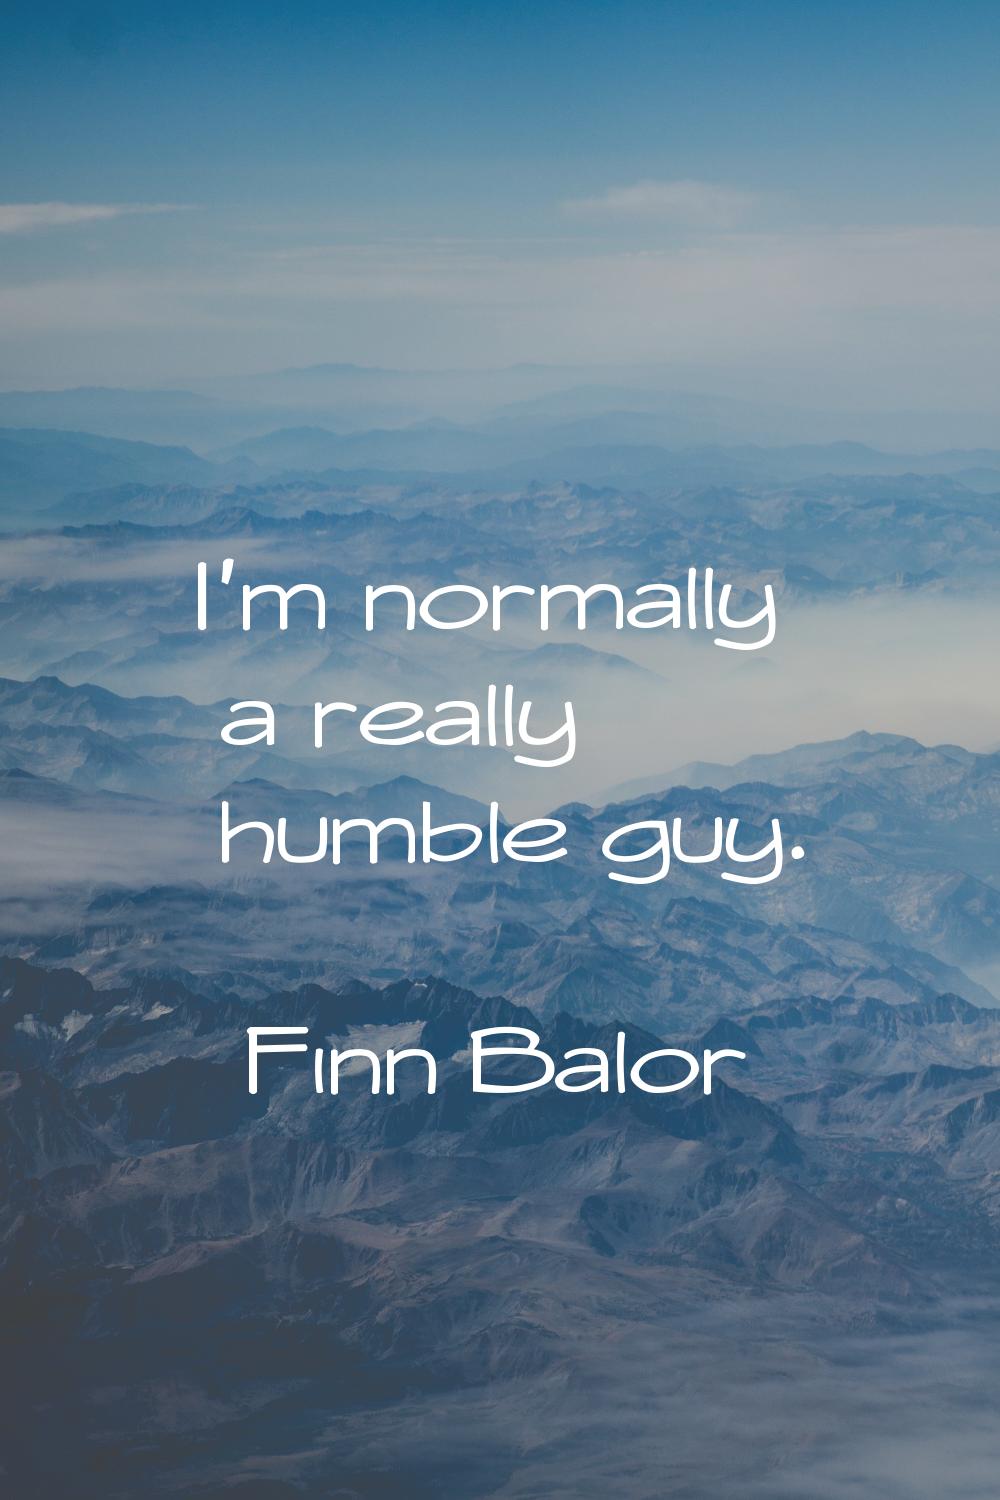 I'm normally a really humble guy.